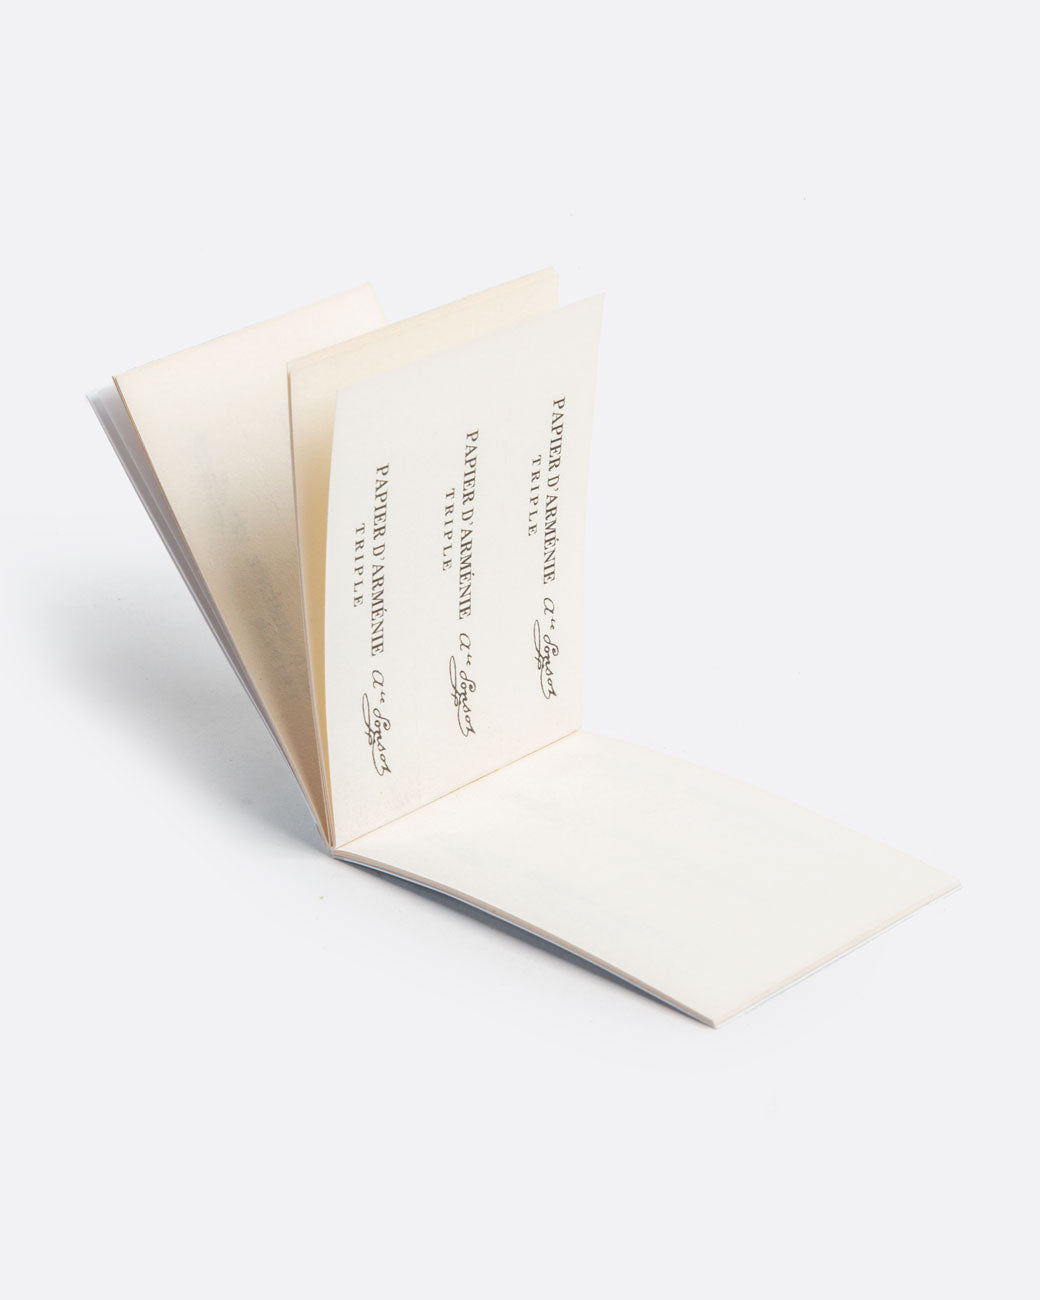 a booklet of paper incense open on a table. the booklet is light blue with white pages.